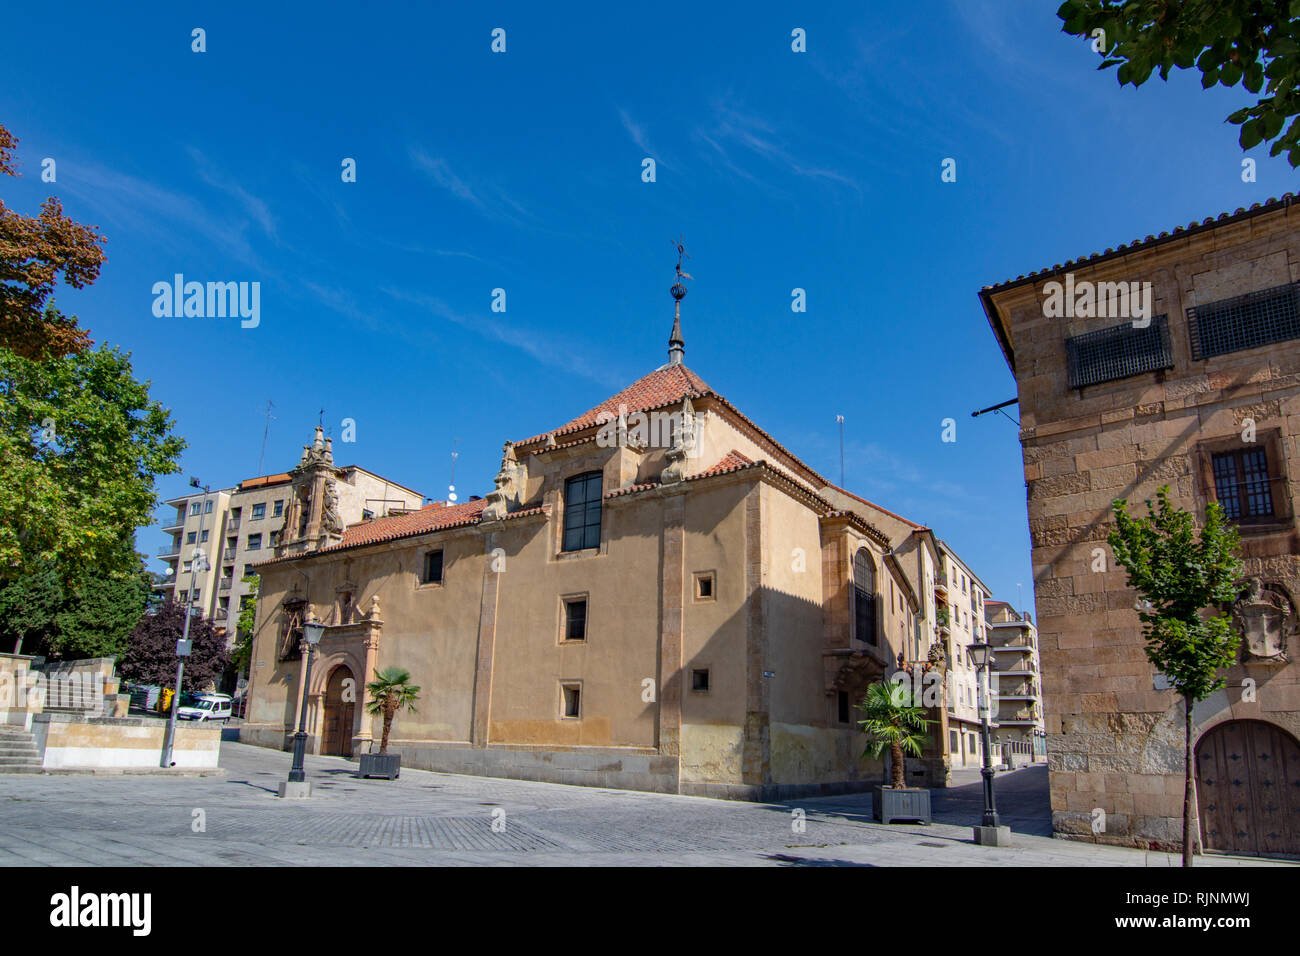 Salamanca, Spain; September 2018: view of the facade of the church of Vera Cuz in the historic center of the city of Salamanca Stock Photo